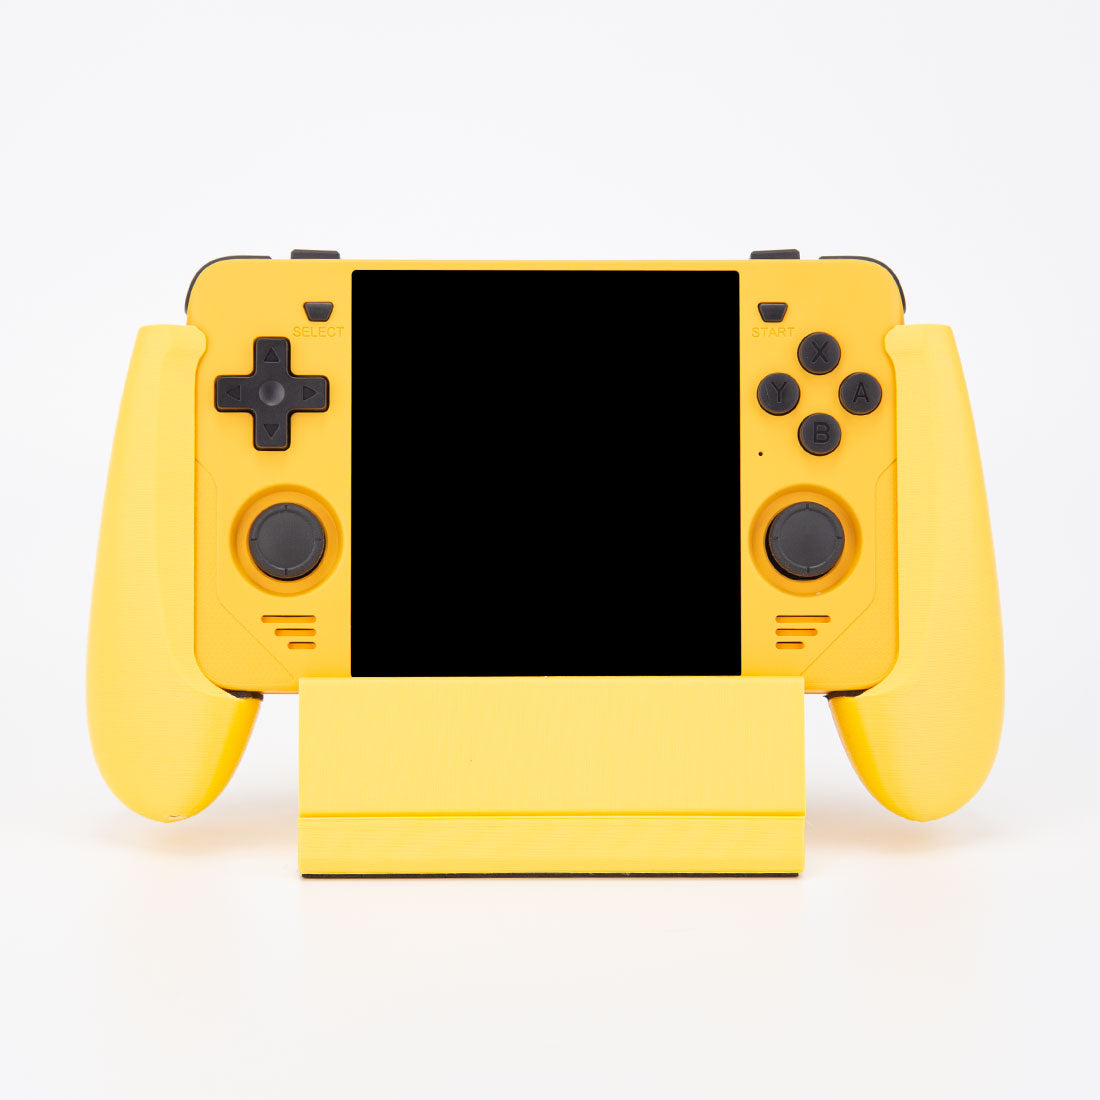 litnxt-3D-printed-magnetic-charging-base-for-rgb30-game-console-yellow-3